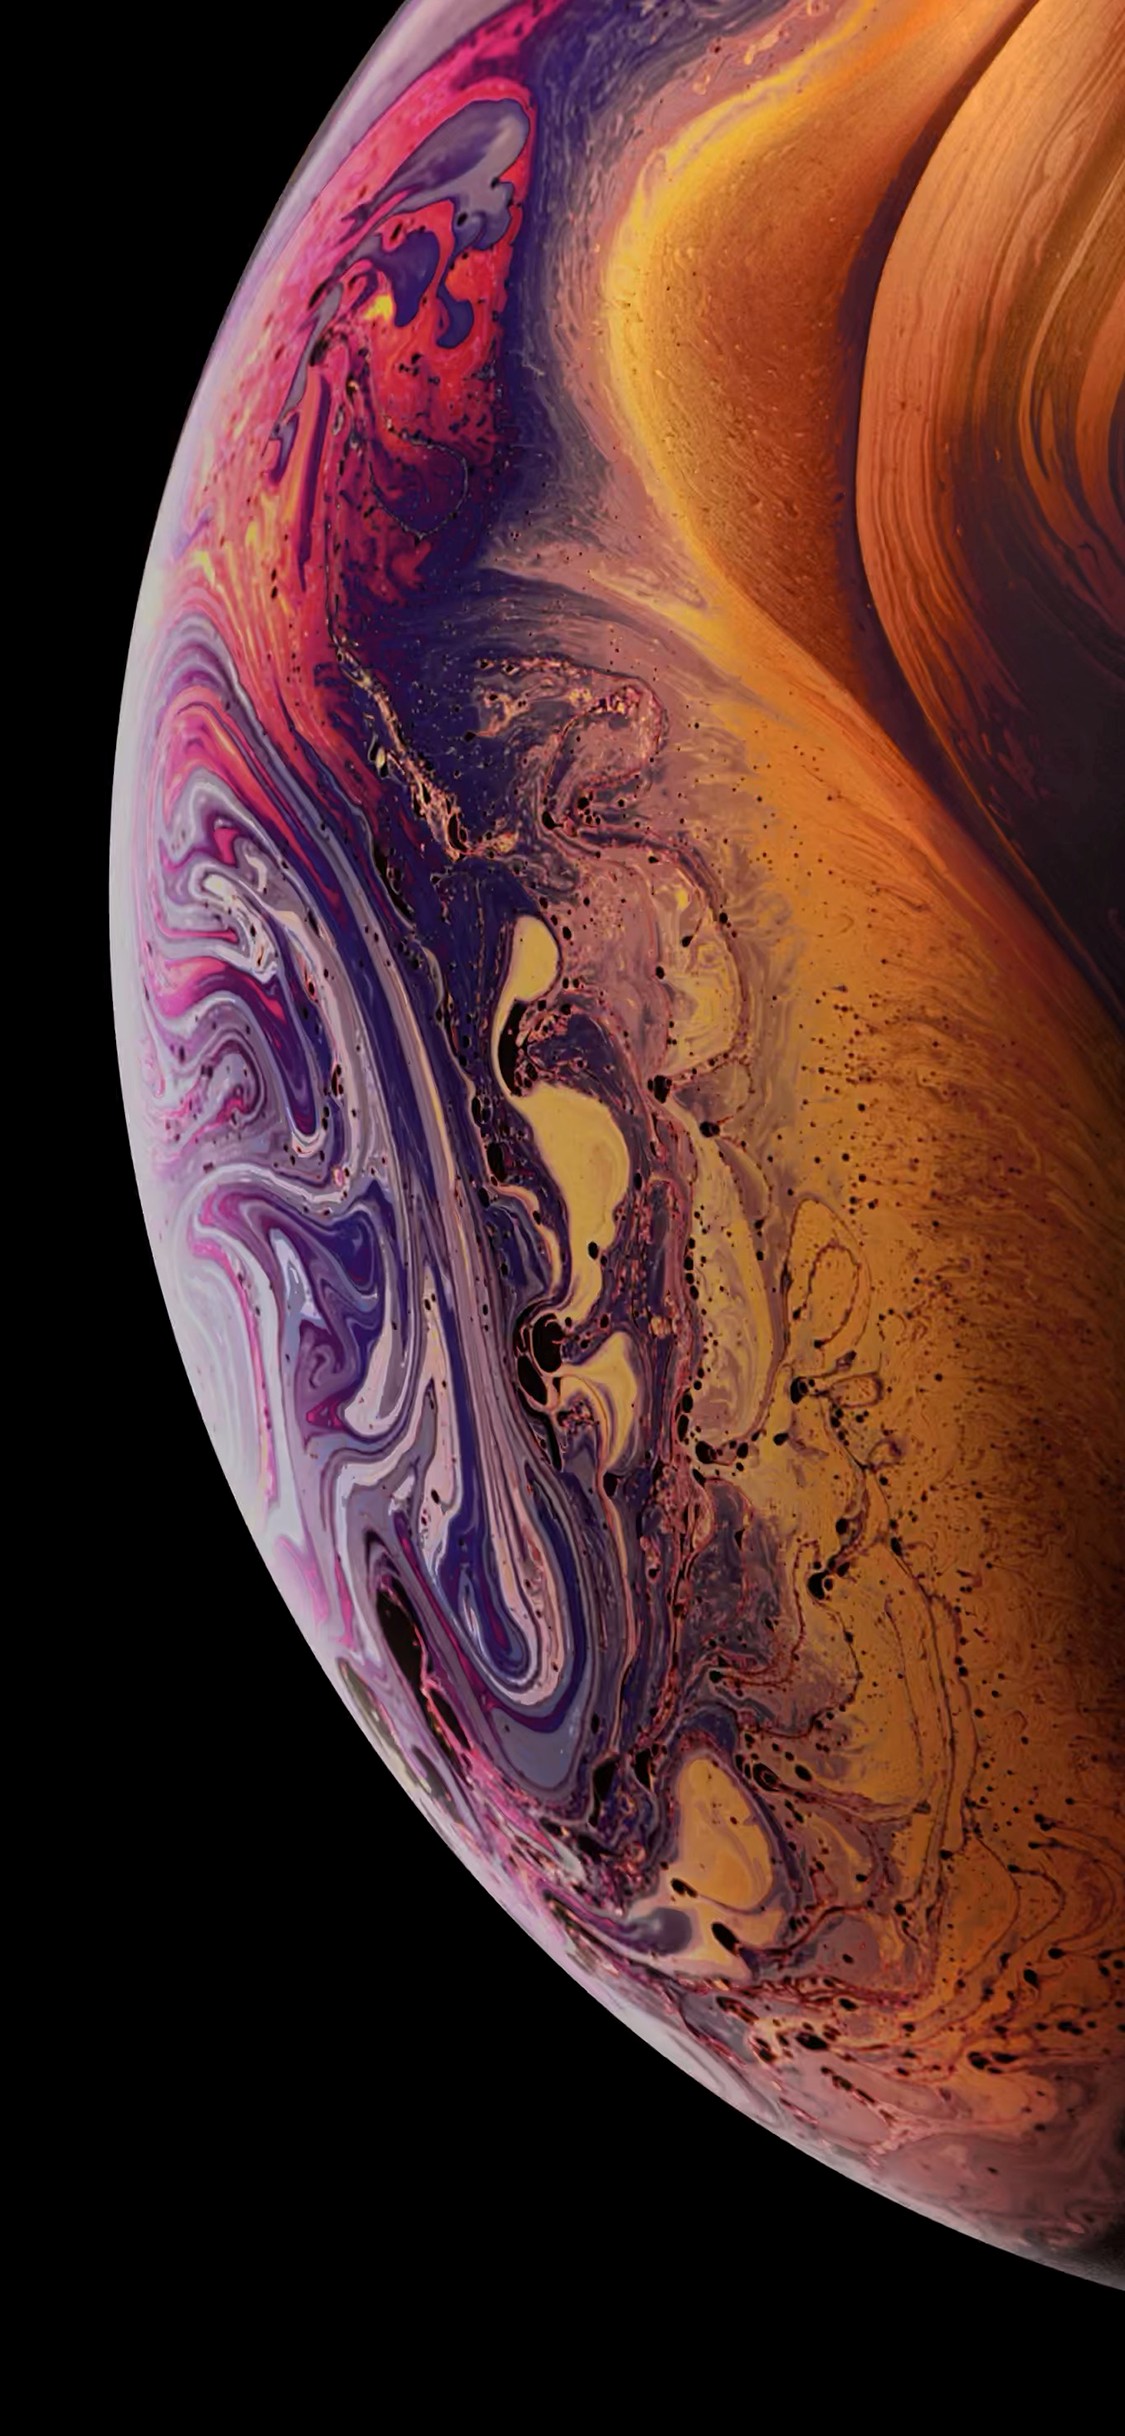 iPhone XS Wallpaper Home Screen with high-resolution 1125x2436 pixel. You can set as wallpaper for Apple iPhone X, XS Max, XR, 8, 7, 6, SE, iPad. Enjoy and share your favorite HD wallpapers and background images